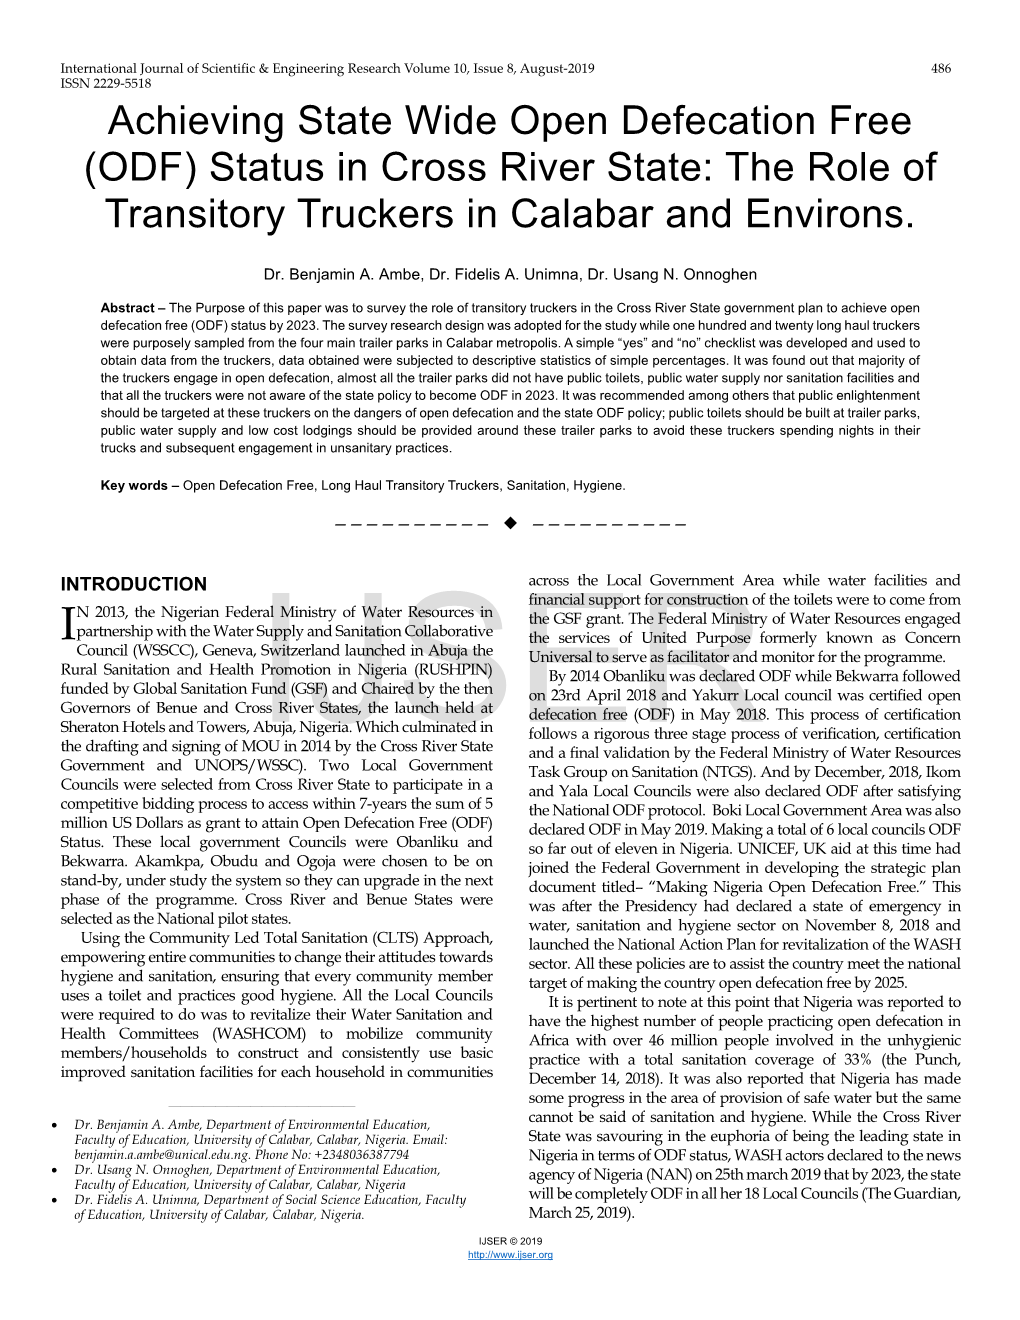 Achieving State Wide Open Defecation Free (ODF) Status in Cross River State: the Role of Transitory Truckers in Calabar and Environs